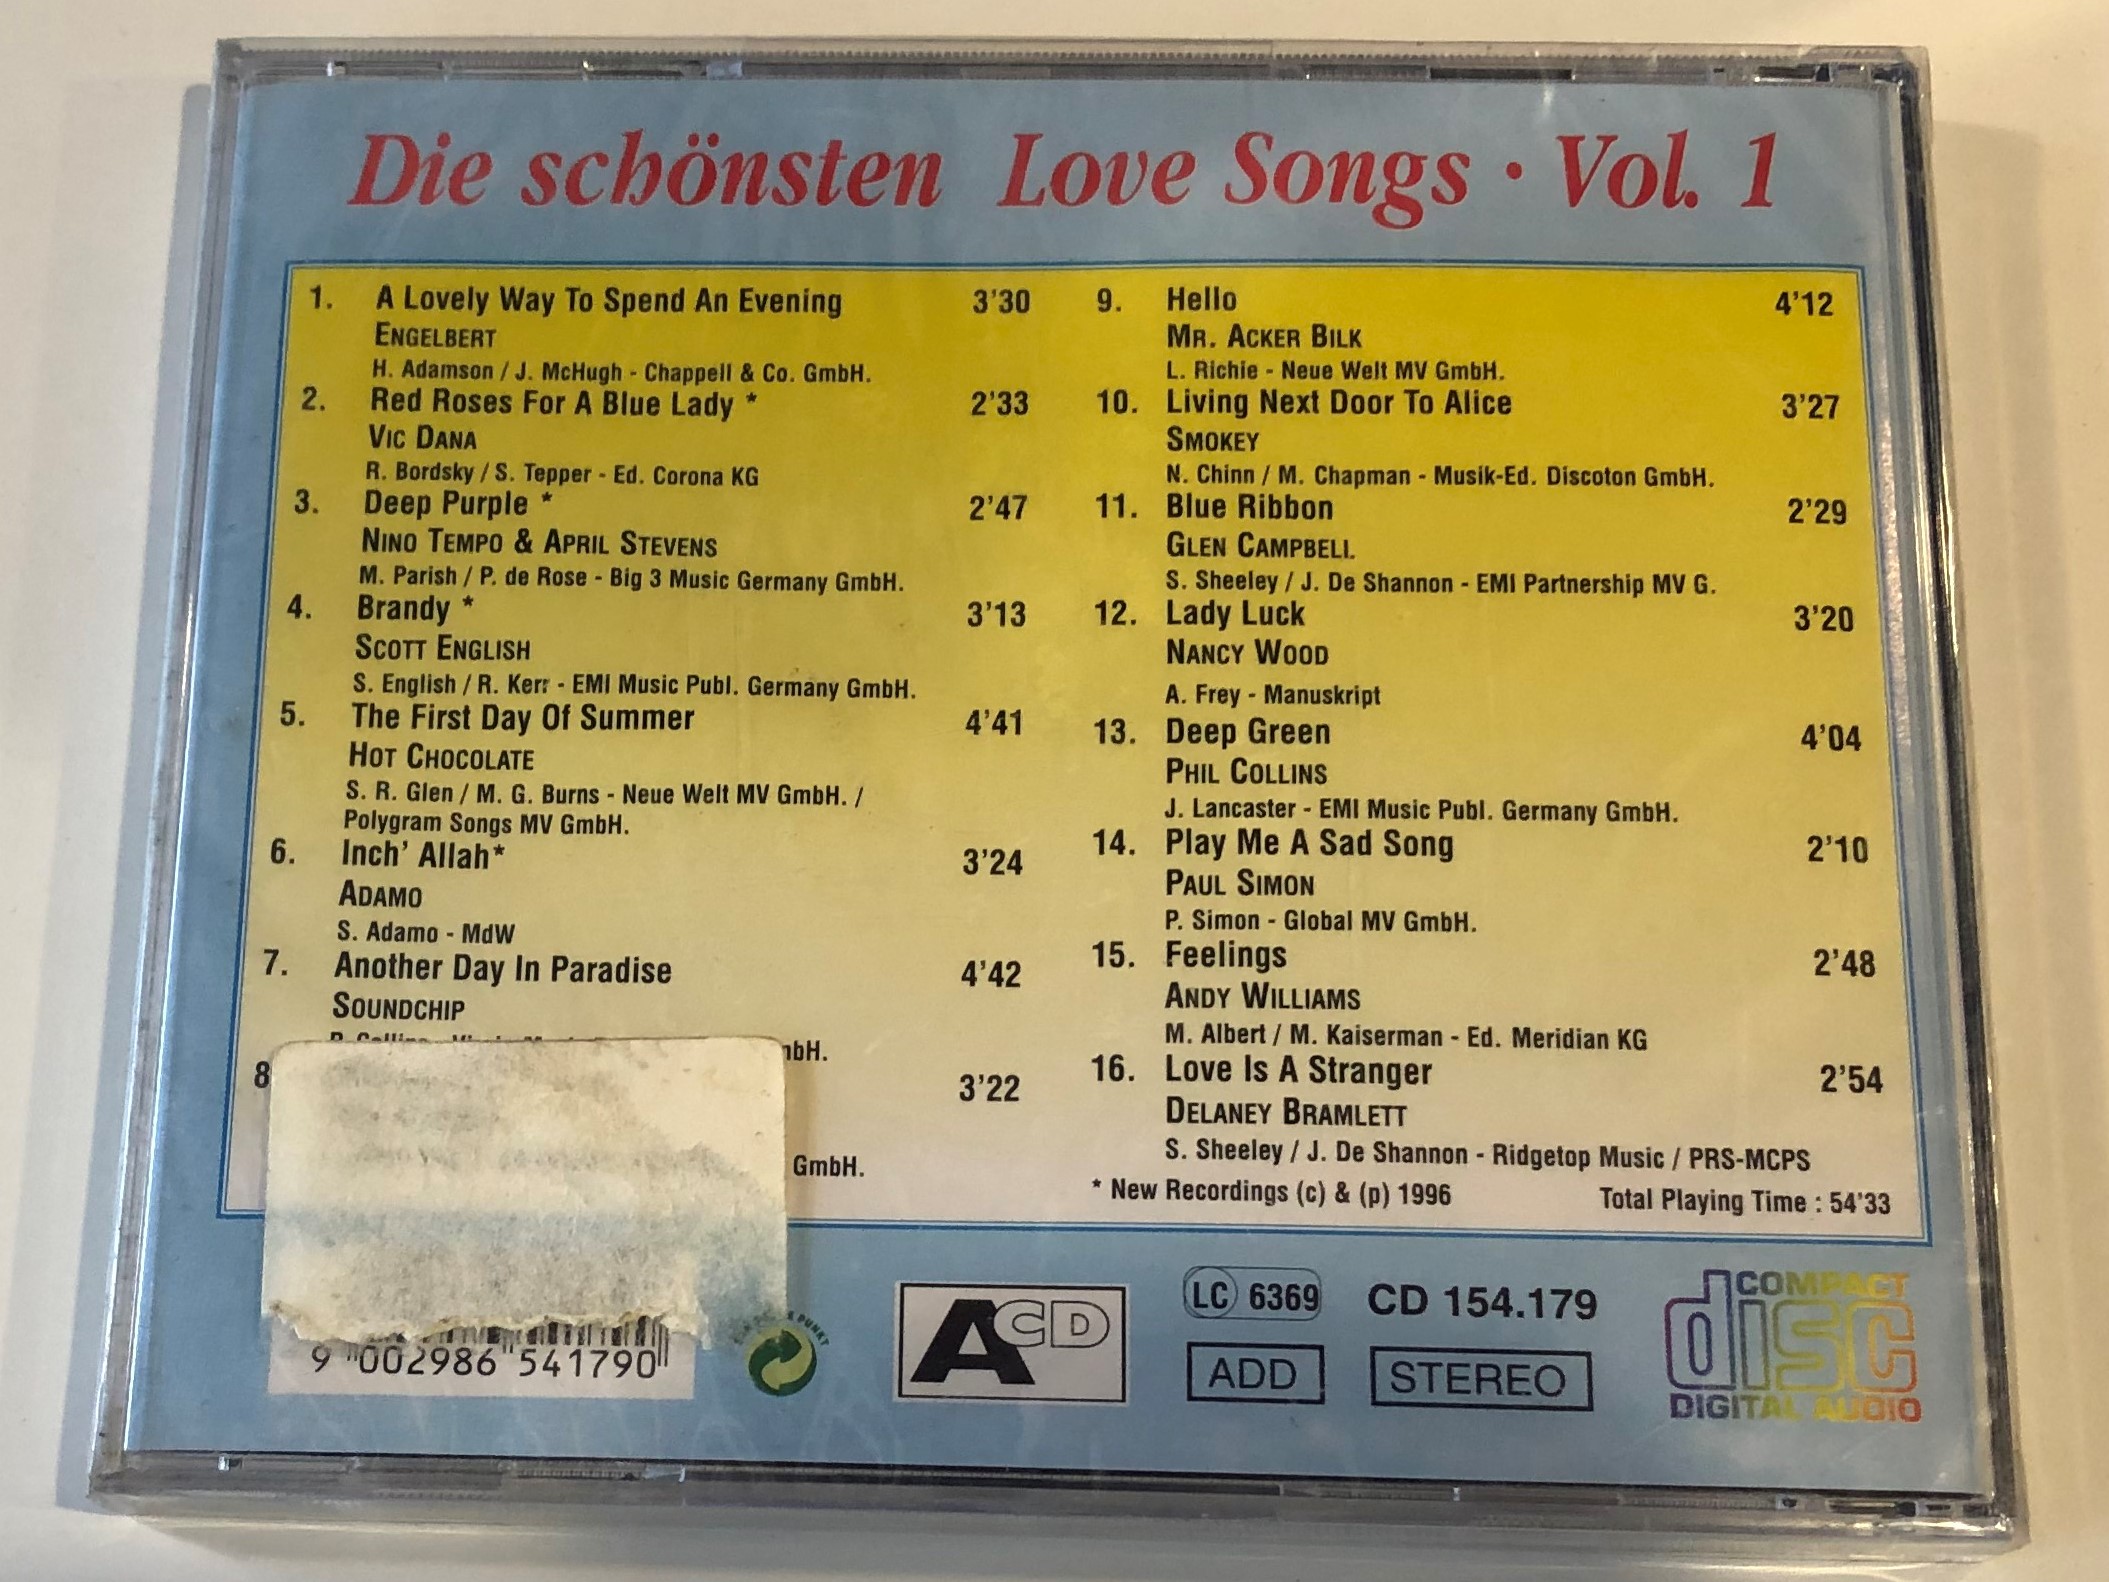 die-sch-nsten-love-songs-folge-1-another-day-in-paradise-living-next-door-to-alice-red-roses-for-a-blue-lady-the-first-day-of-summer-paul-simon-phil-collins-hot-chocolate-andy-williams.jpg